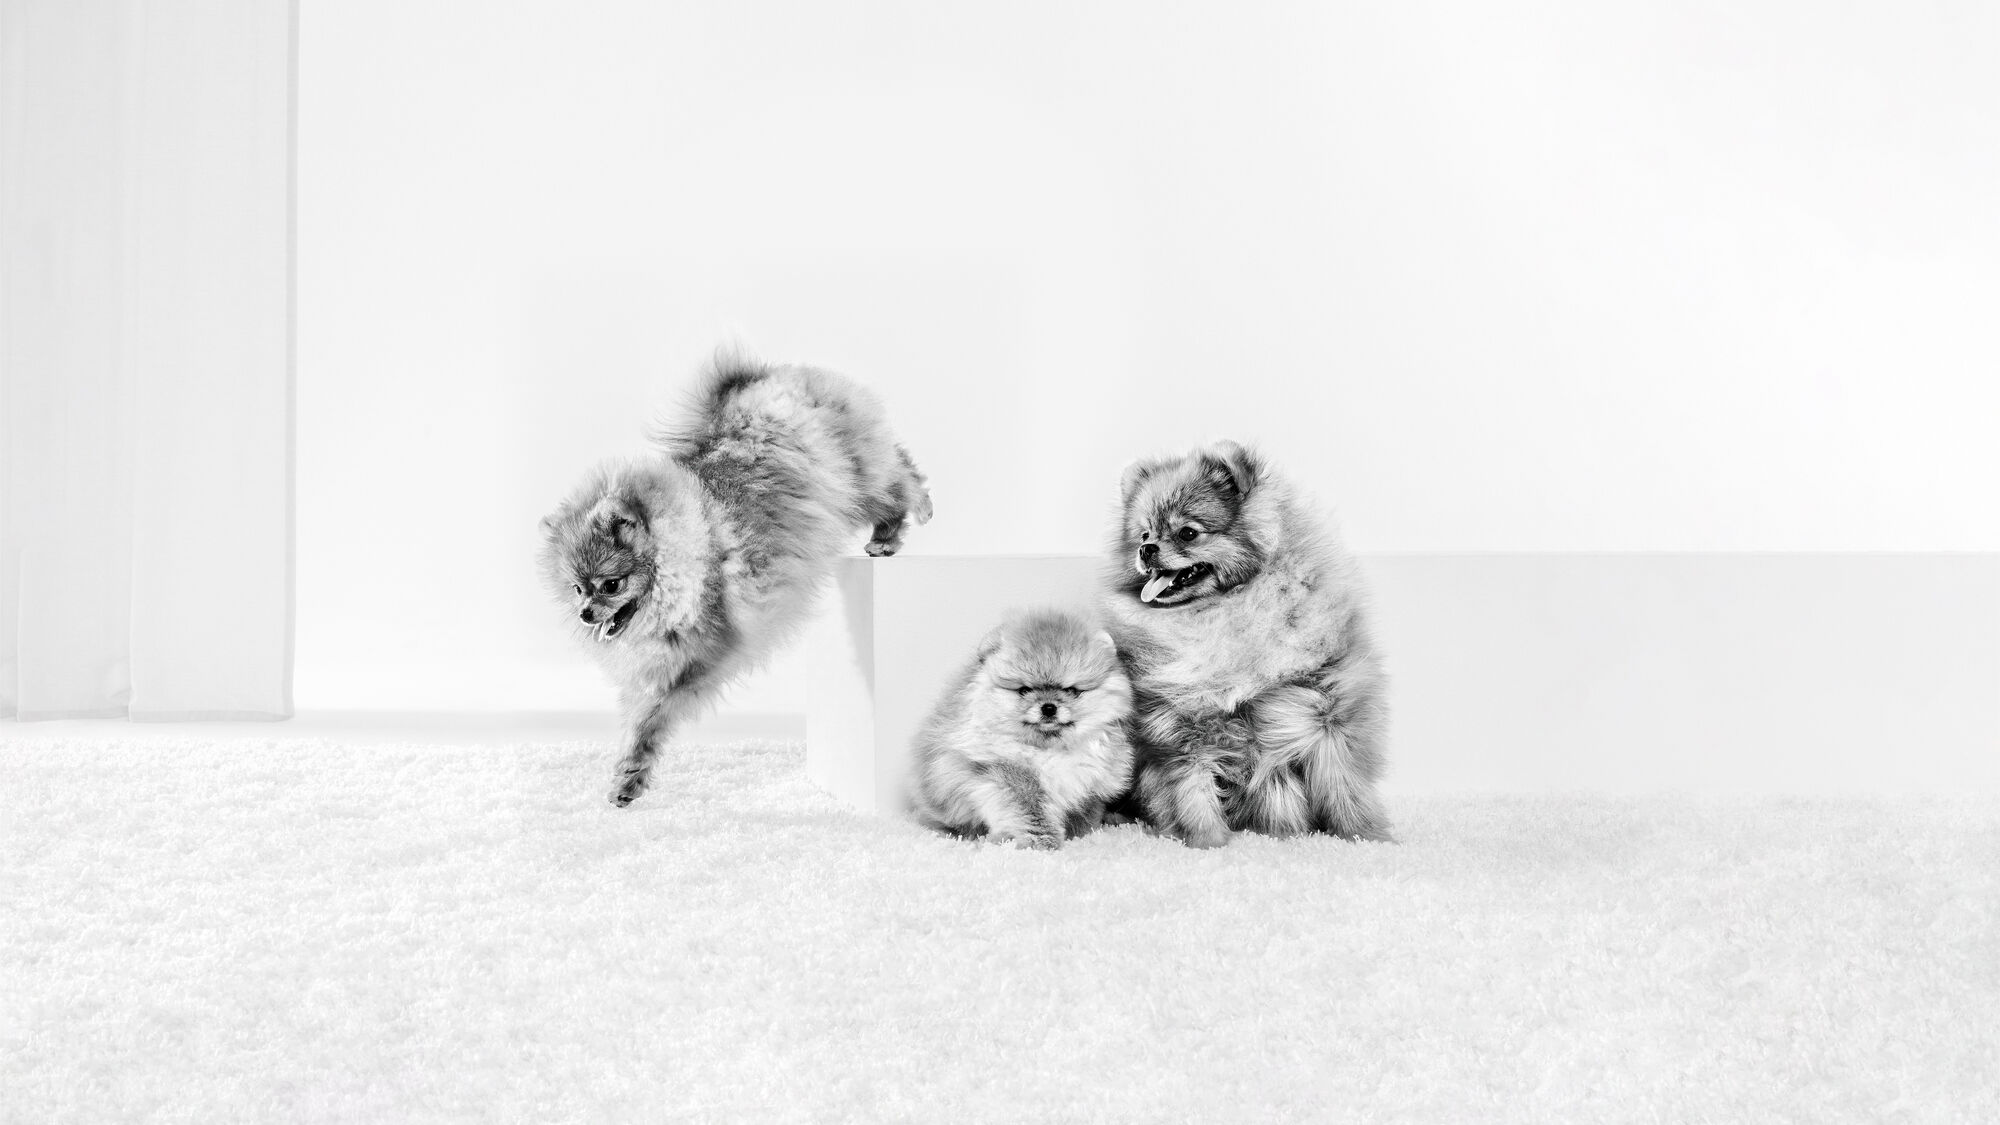 Black and White group of Pomeranian puppies playing indoors